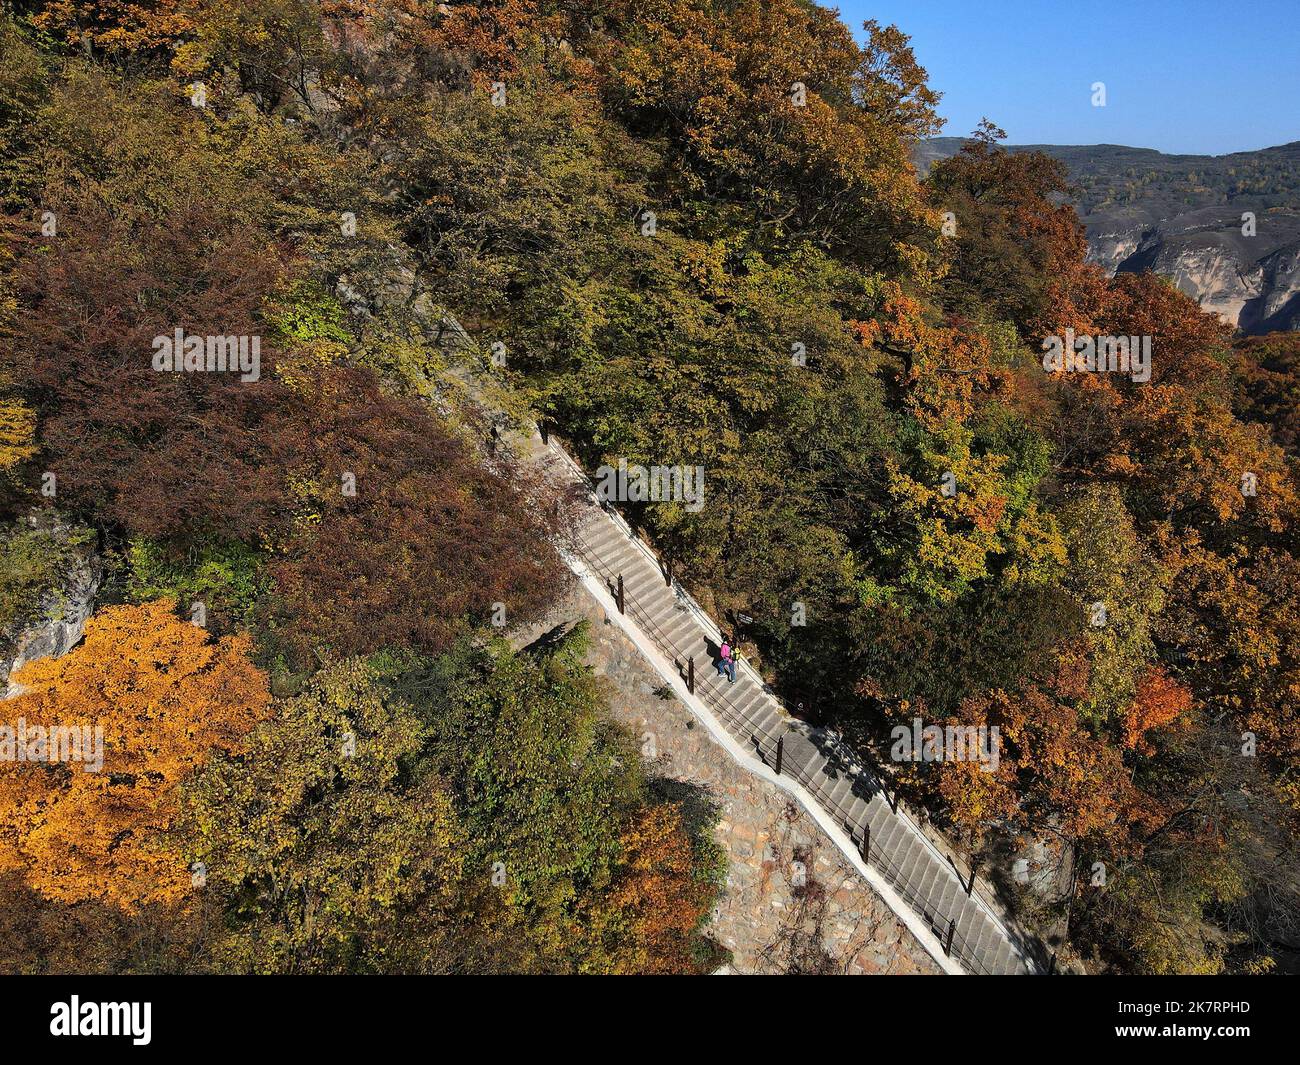 PINGLIANG, CHINA - OCTOBER 18, 2022 - Photo taken on Oct 18, 2022 shows the scenery of colorful leaves in Kongtong Mountain in Pingliang City, Northwe Stock Photo